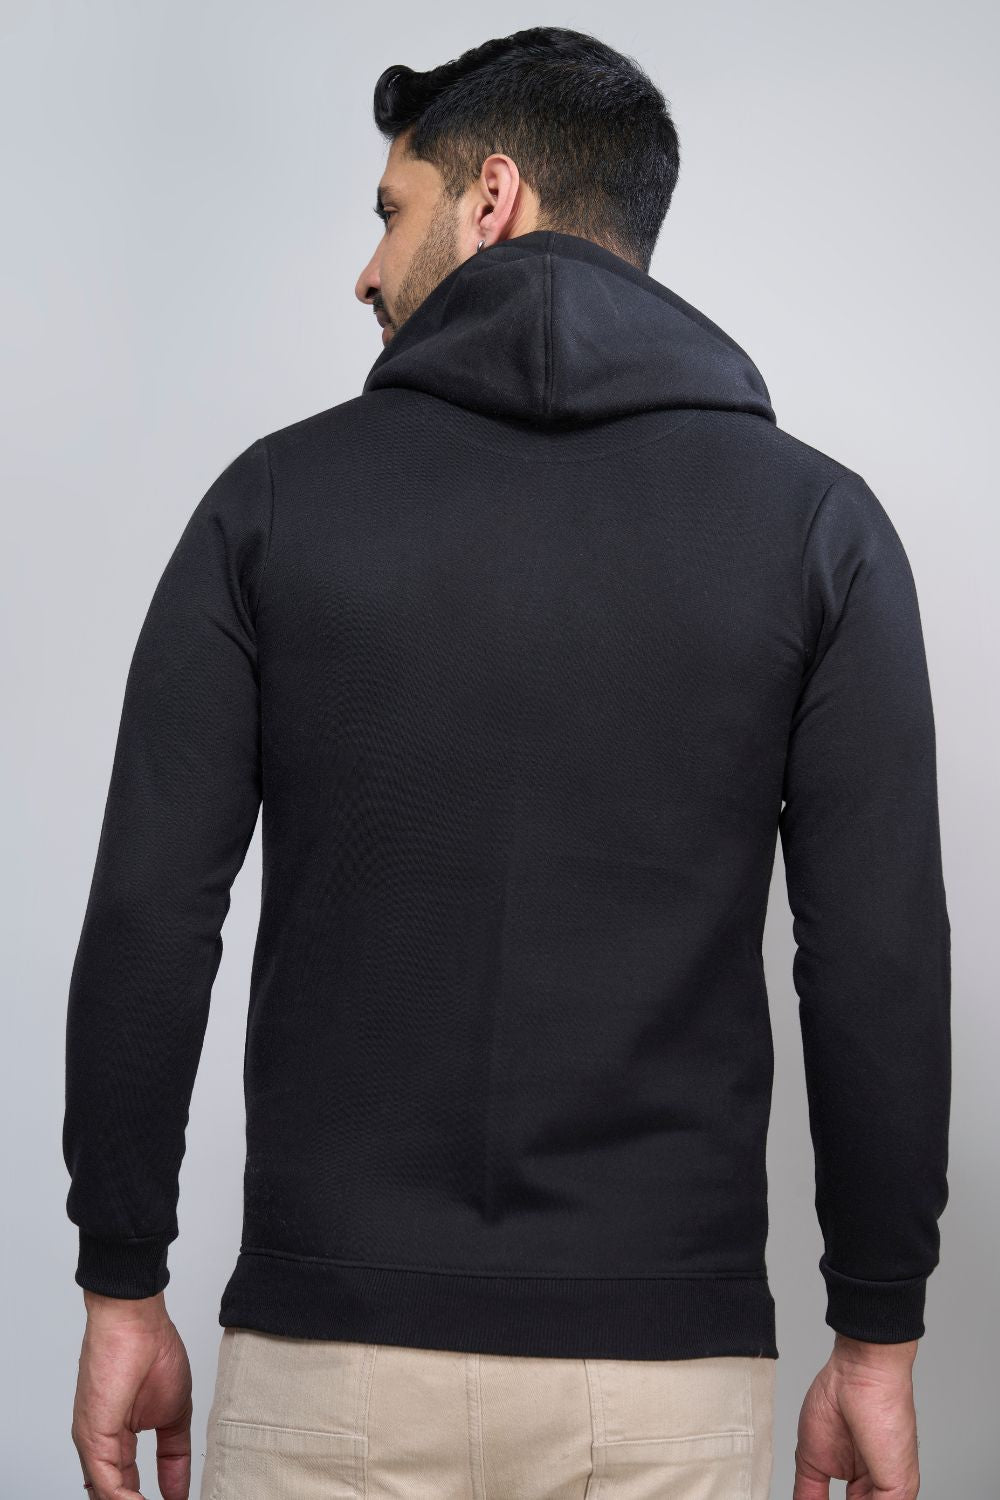 Black colored, hoodie for men with full sleeves and relaxed fit, Back view.